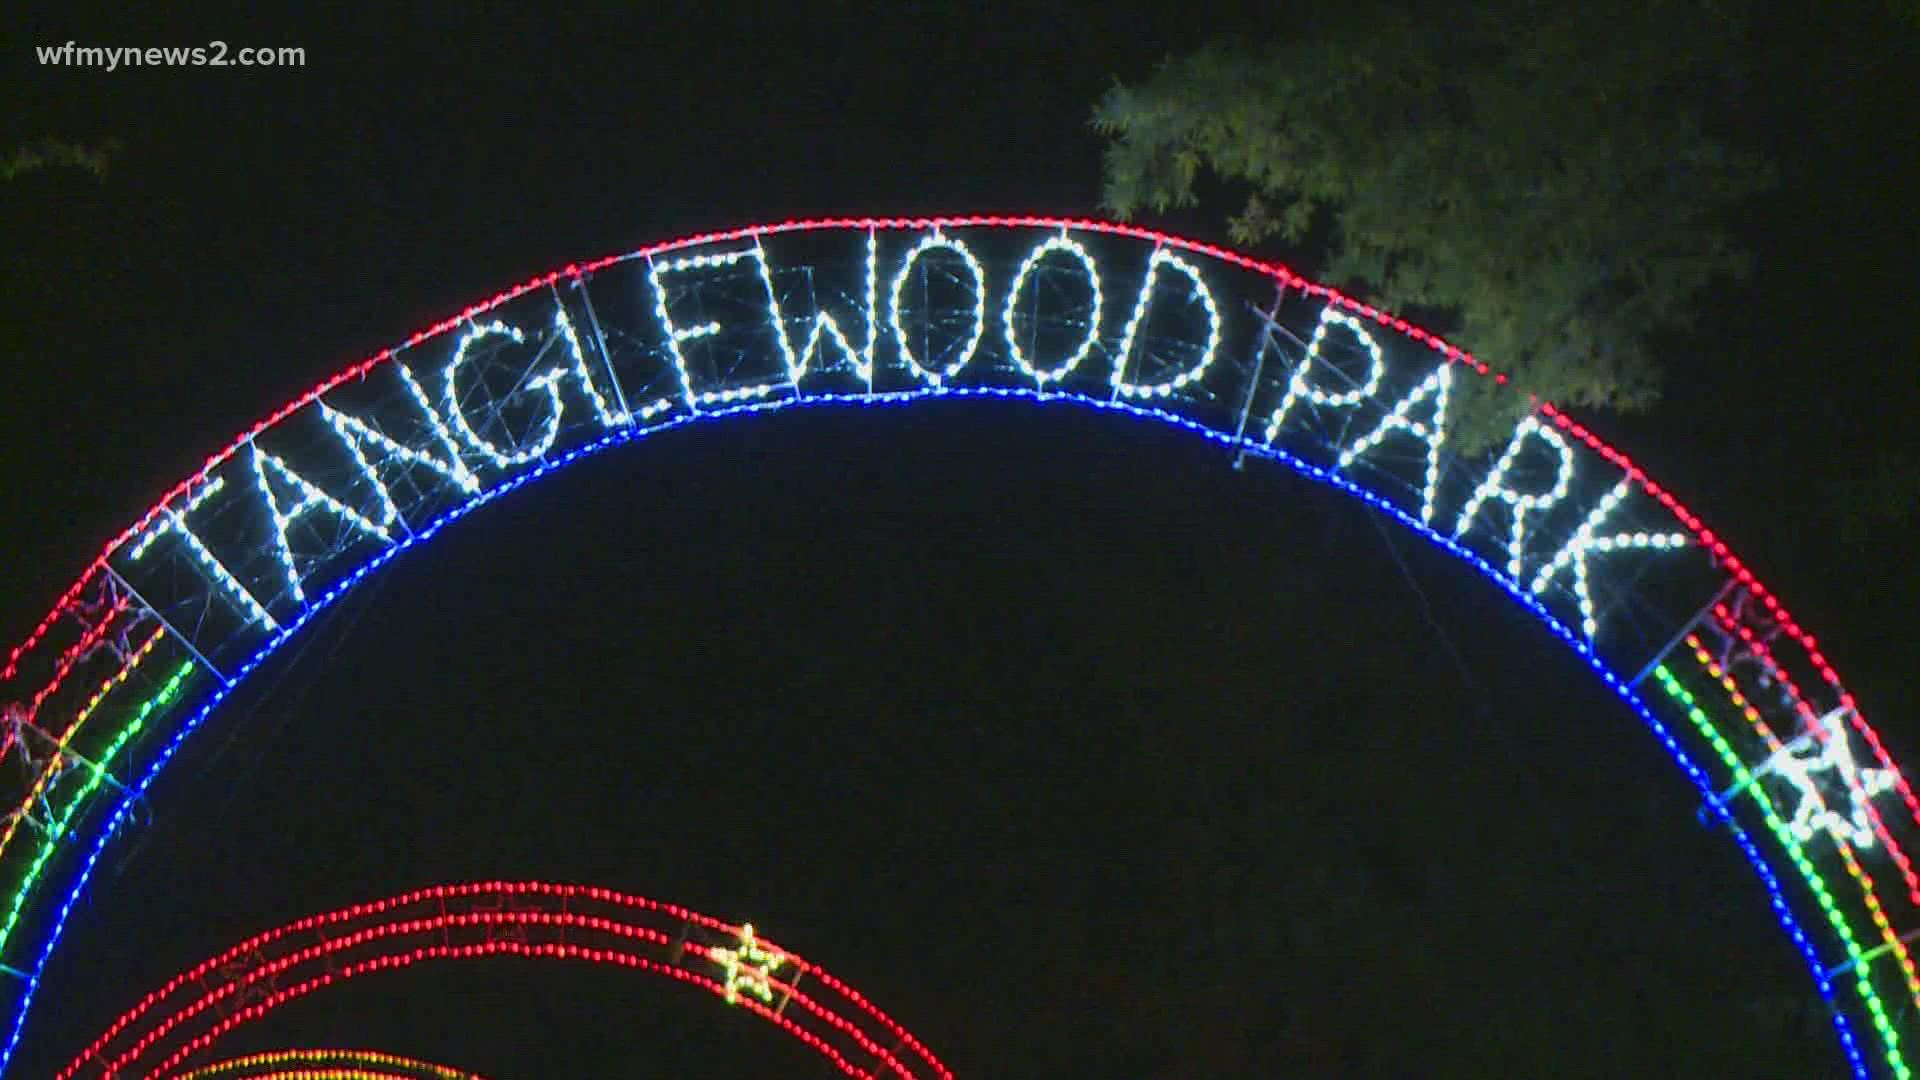 Folks can go see the holiday light show at Tanglewood Park through Jan. 1.